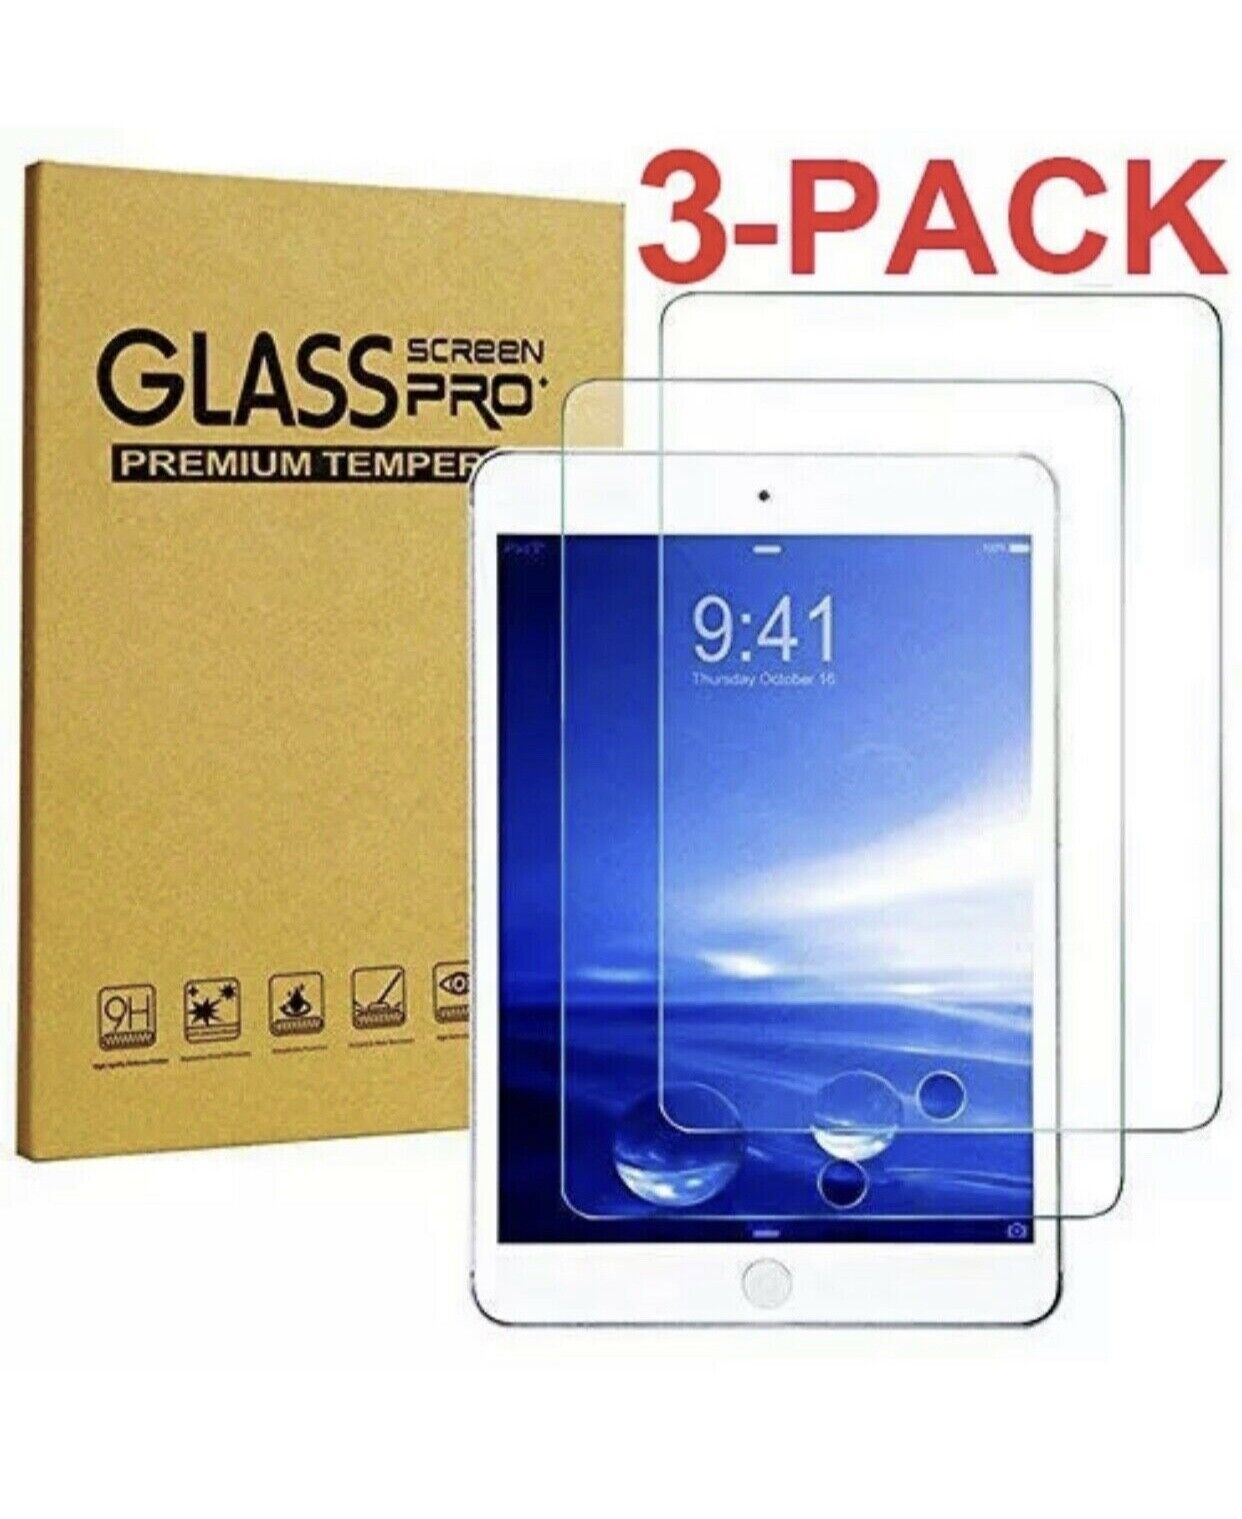 [3-Pack] Tempered GLASS Screen Protector for Apple iPad 8th Generation 2020 10.2 Unbranded Does Not Apply